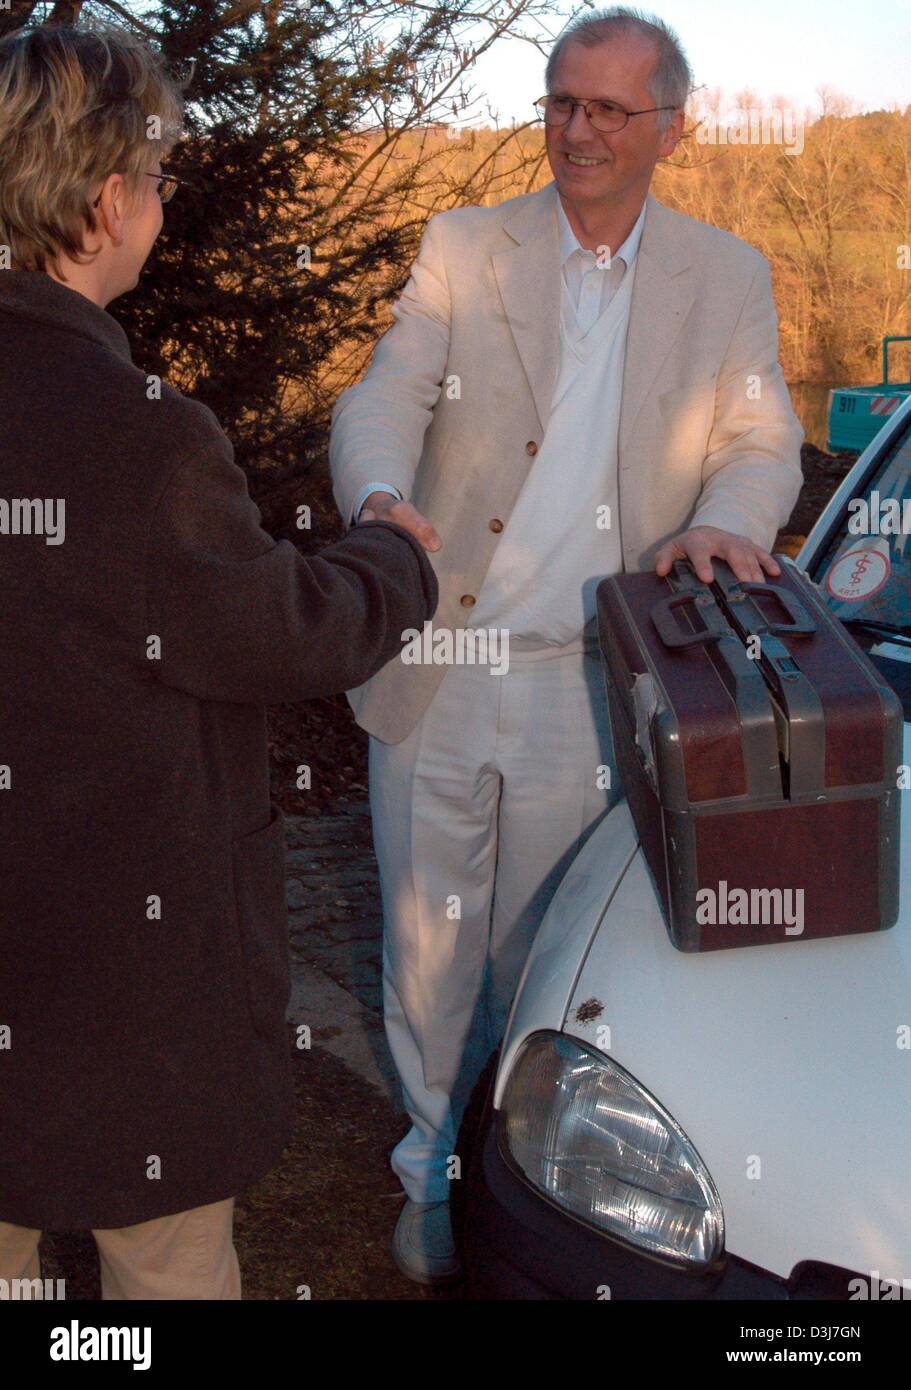 (dpa) - Physician Rainer Graeter greets a patient in Essingen, Germany, 16 February 2004. Graeter is a country doctor in the rural German 'Schwaebische Alb' region. Next to his practice he also visits his patients at their houses. Stock Photo